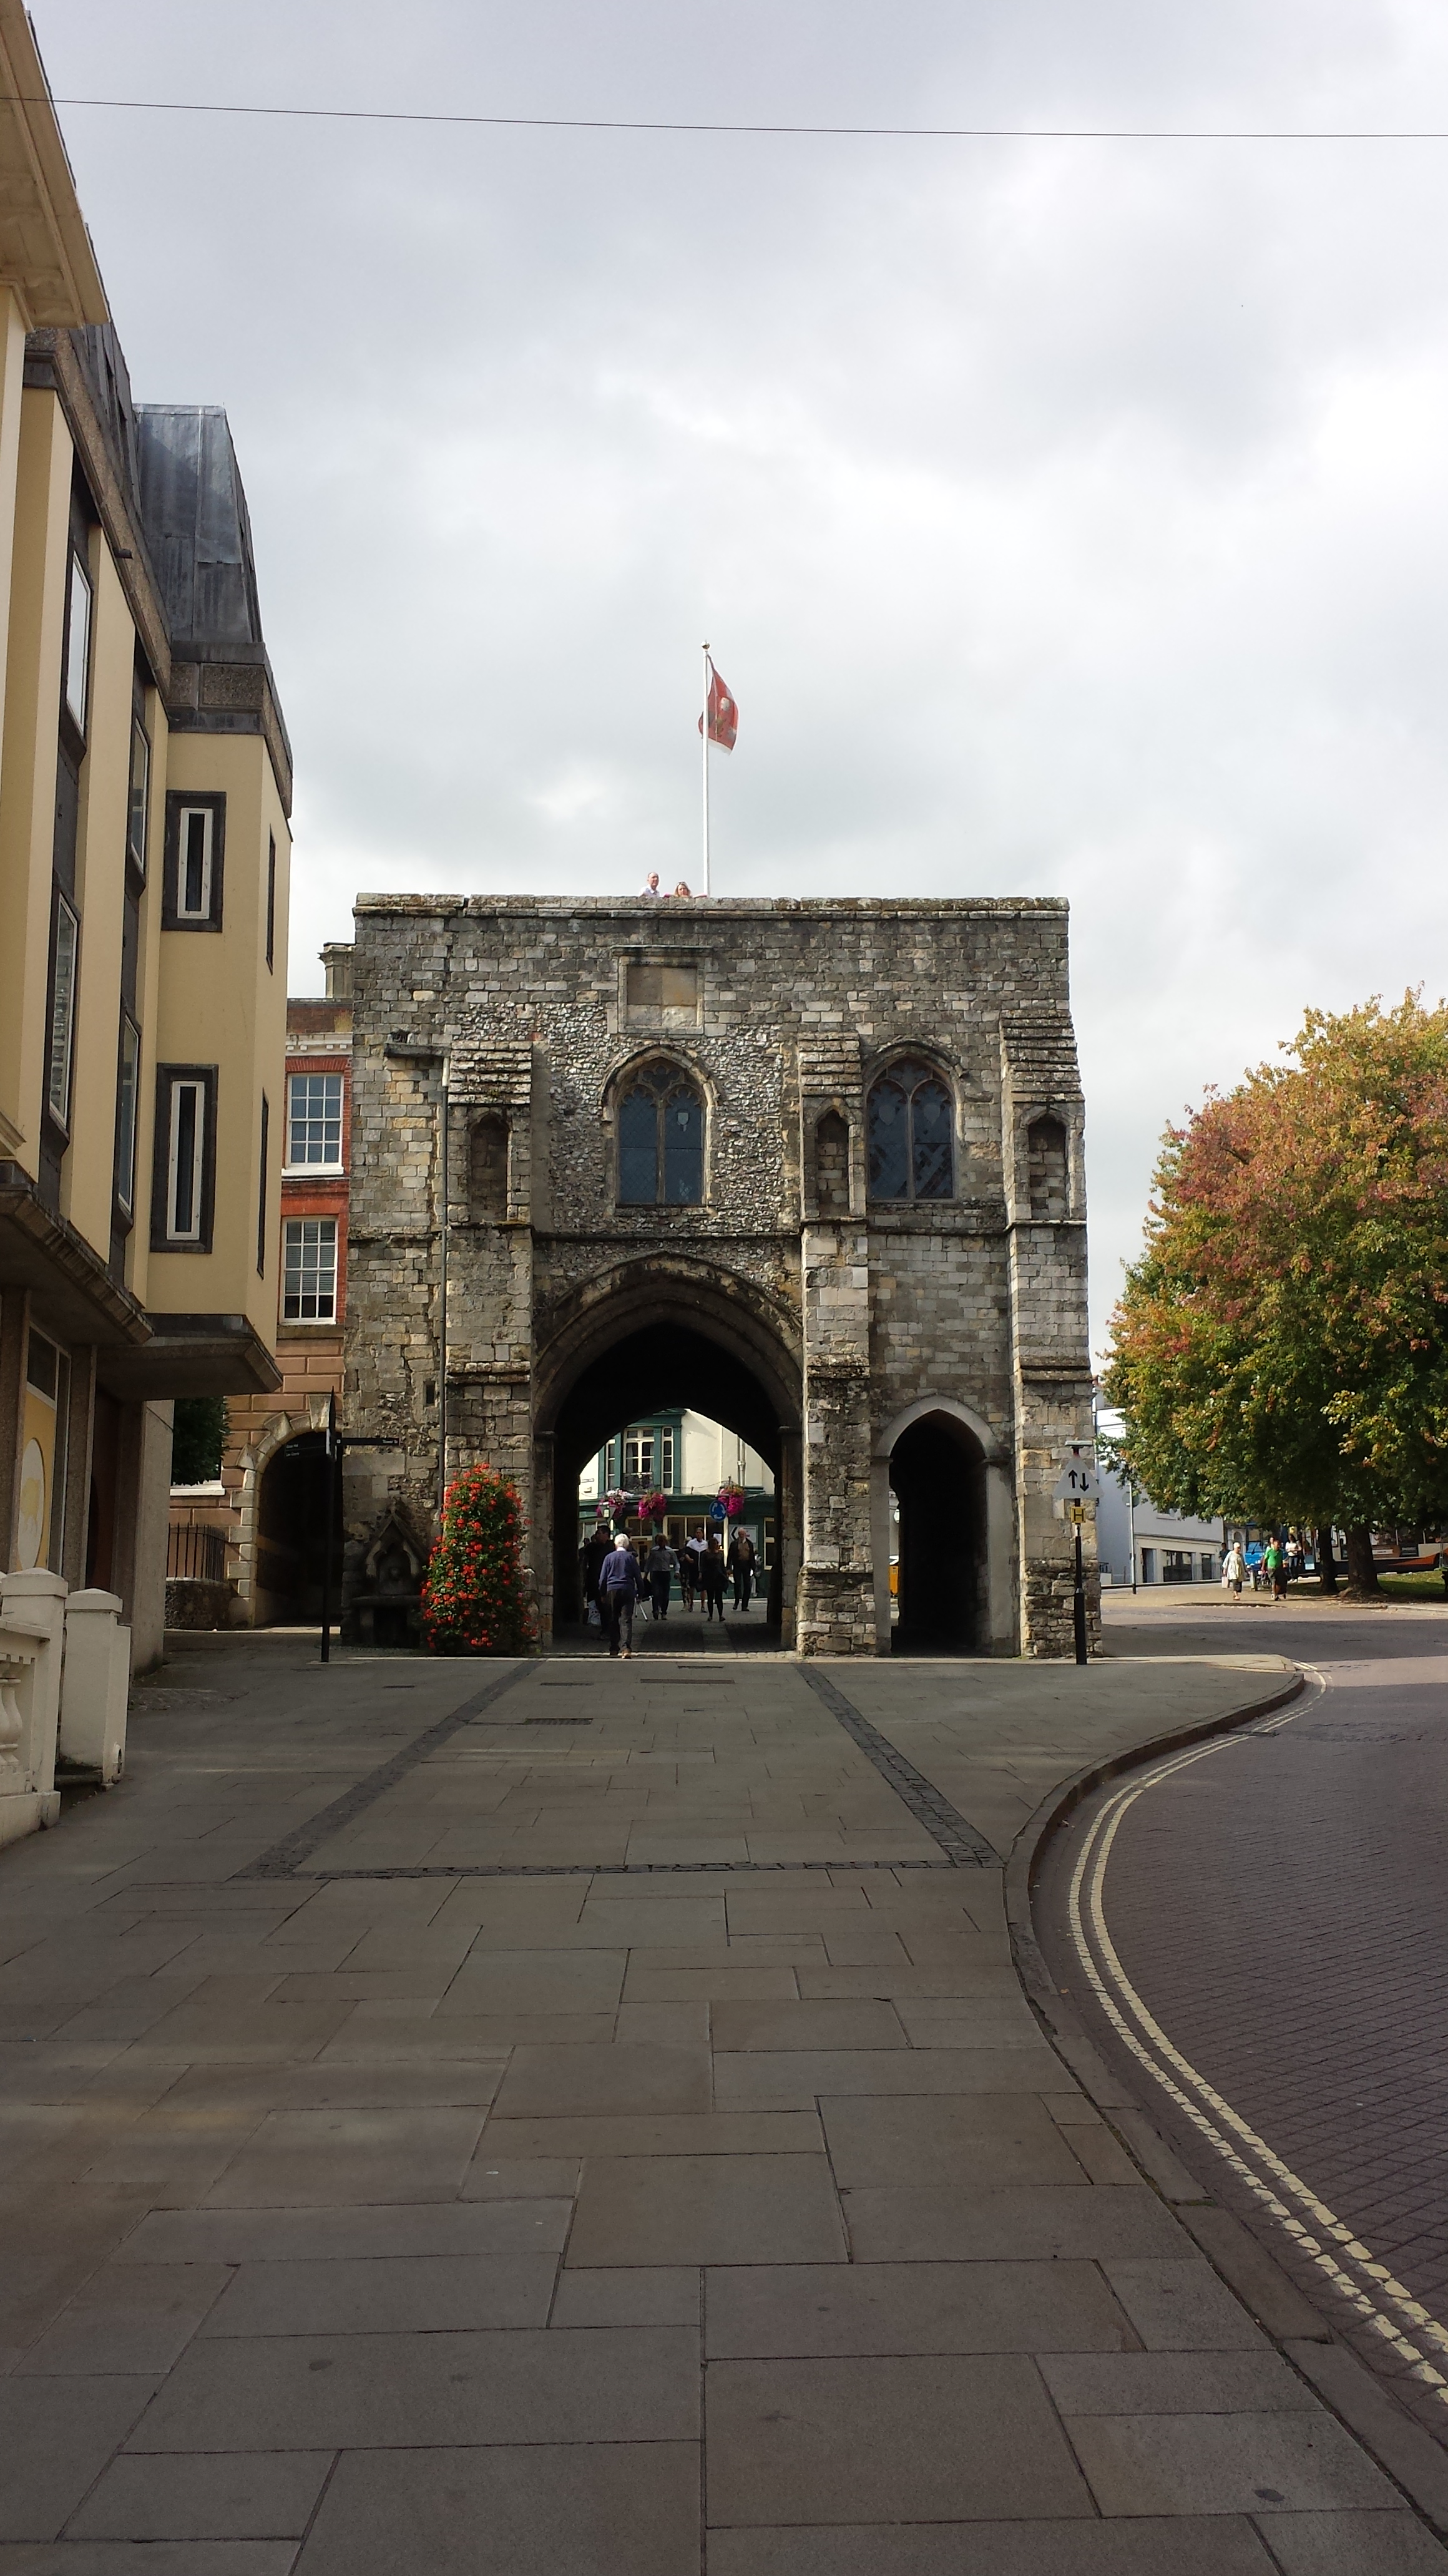 looking up the high street towards the medieval stone gatehouse known as Westgate in winchester, there is an archway at the base of the gatehouse where the gate used to be and a red flag on a flag pole at the top